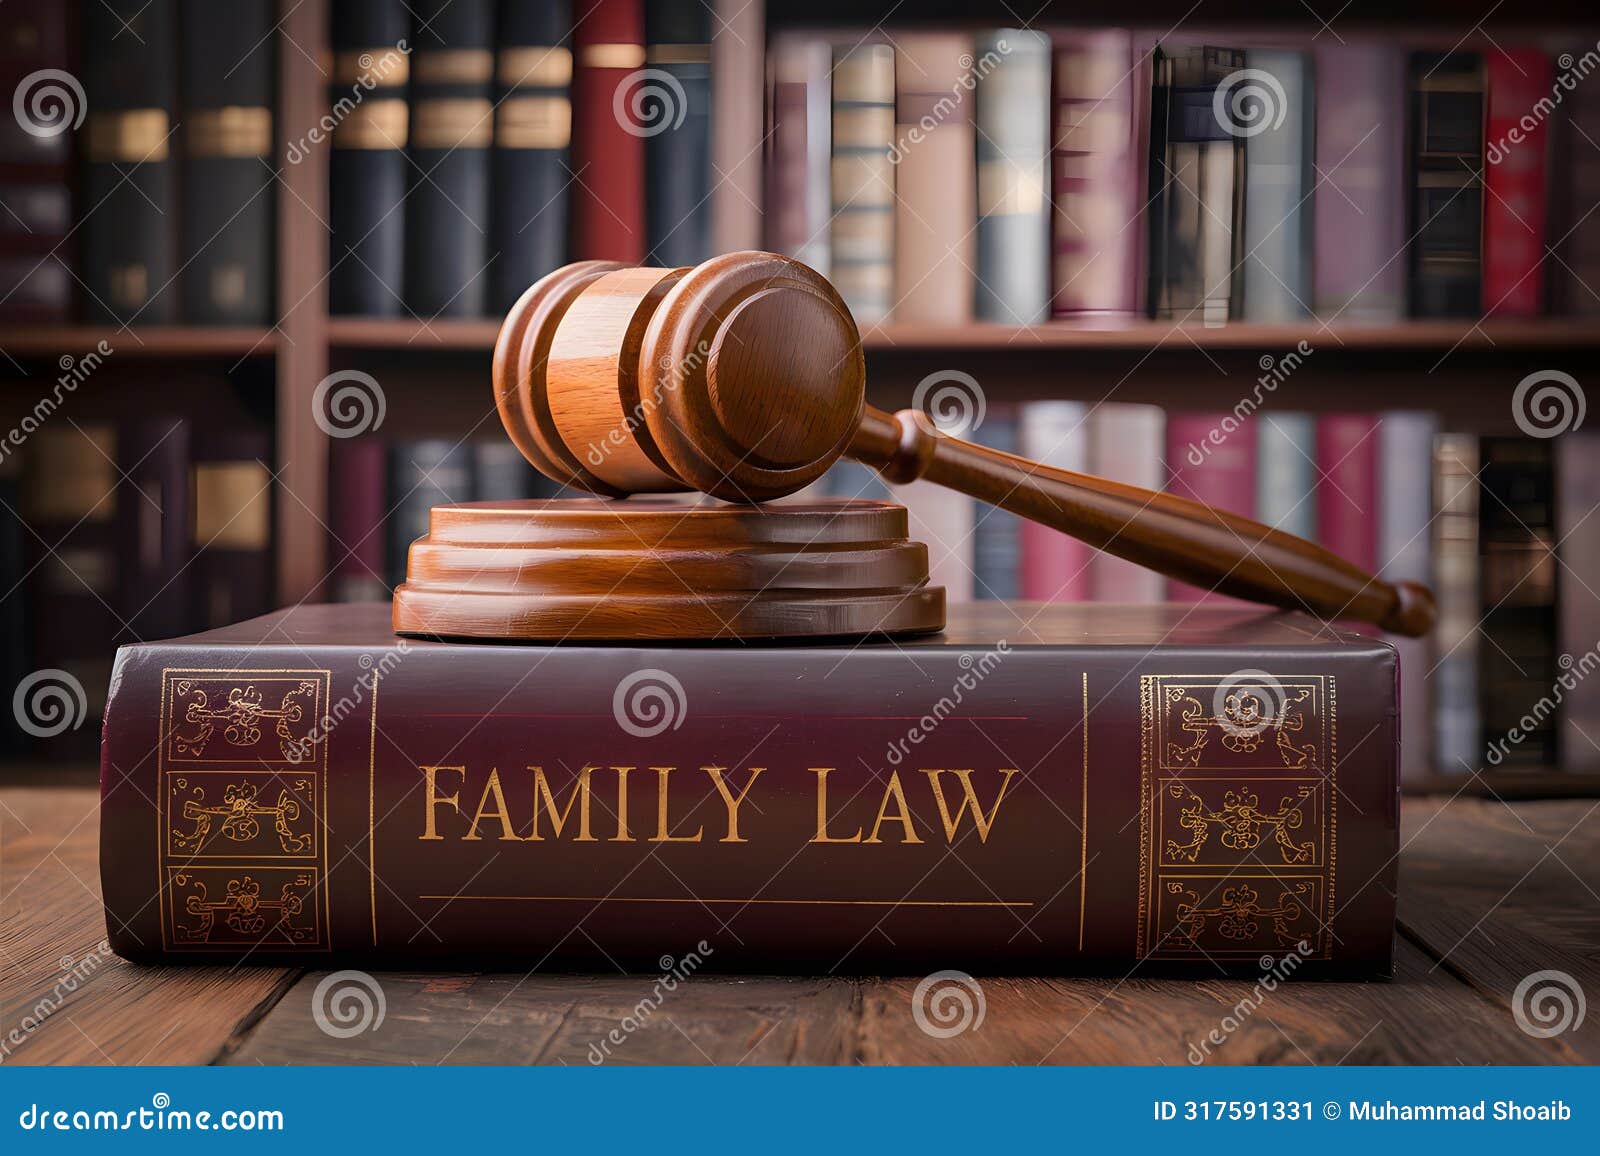 judicial authority ized by gavel on family law book in scholarly setting.